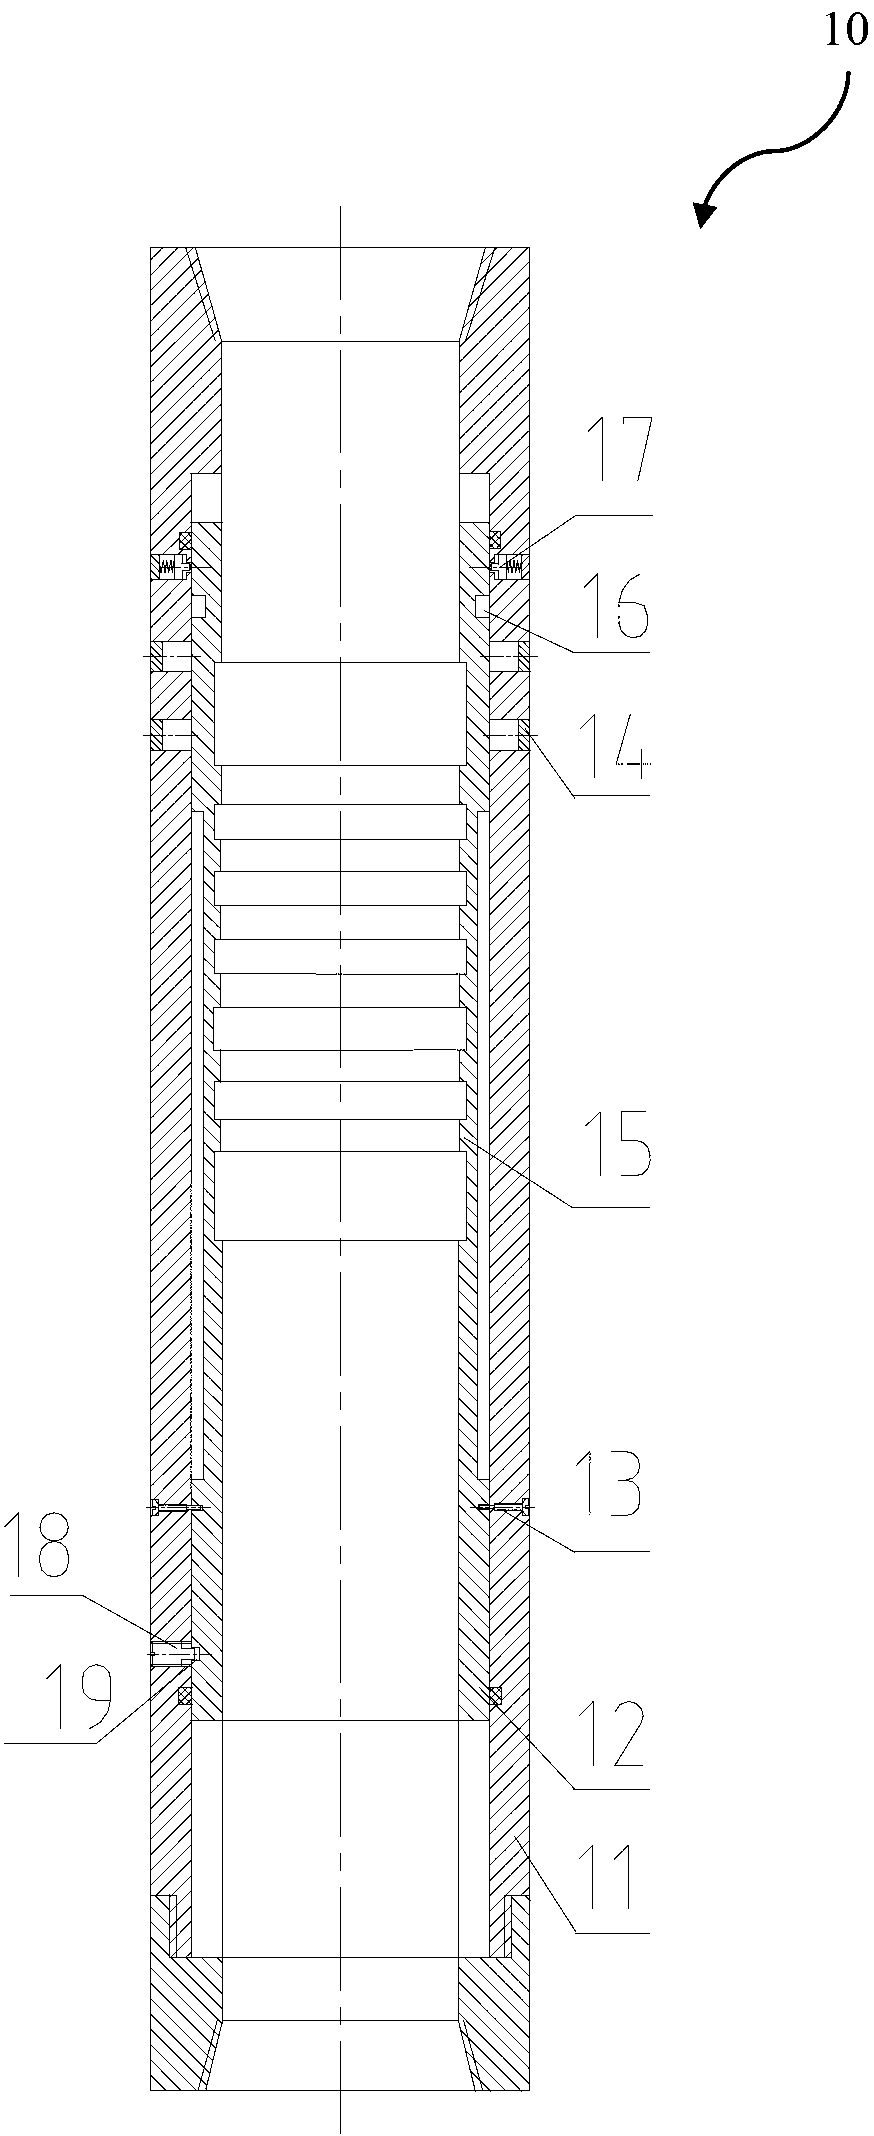 Sliding sleeve type fracturing module, device including the module and method of using the device